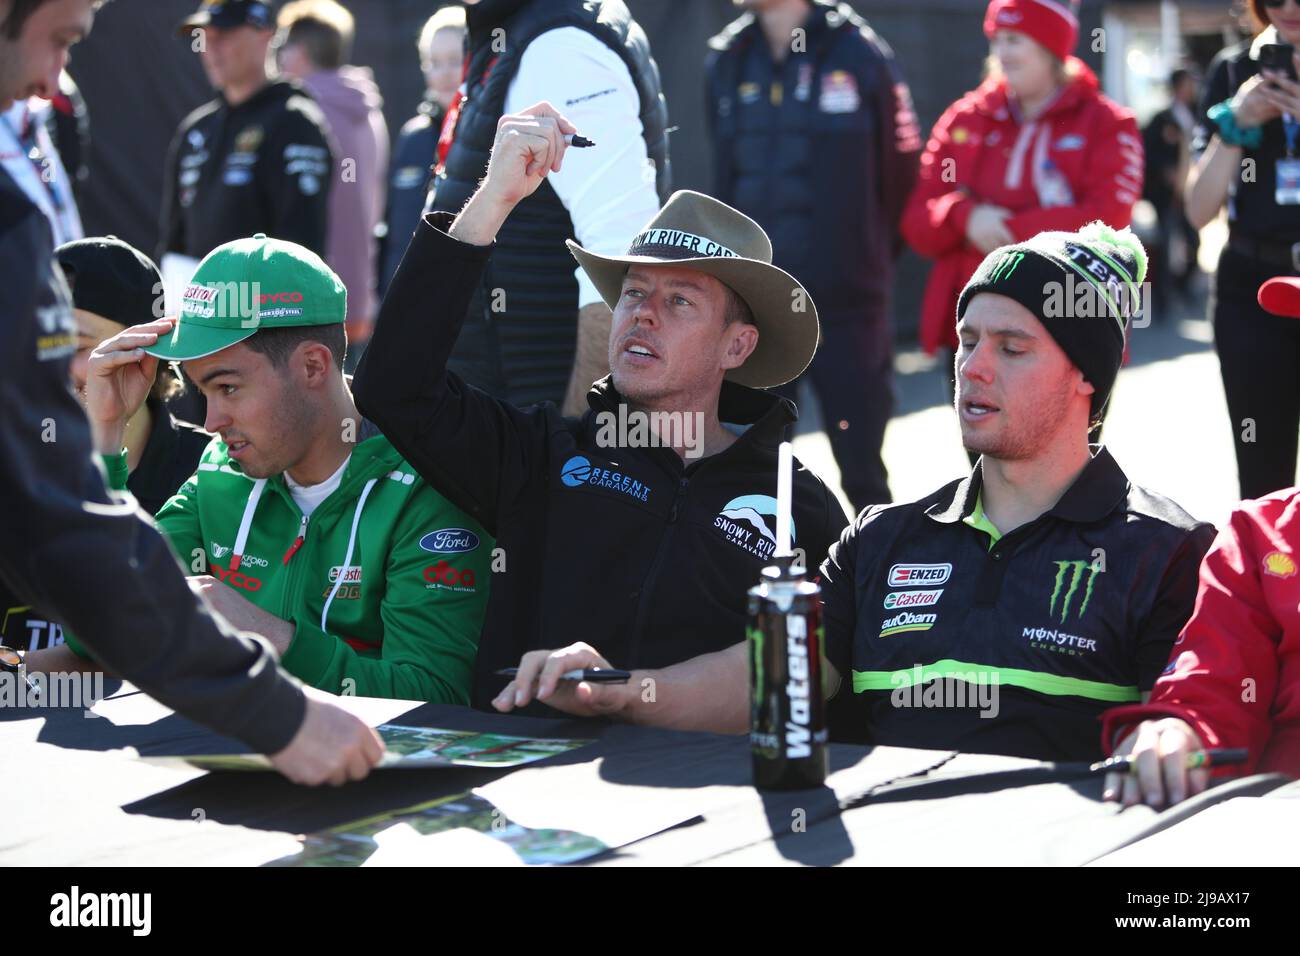 Benalla, Victoria, Australia. 22nd May, 2022. Repco Australian Supercars Championships-Pizza Hut Winton SuperSprint - James Courtney racing for Tickford Racing talks with and signs autographs for fans -Image Credit: brett keating/Alamy Live News Stock Photo